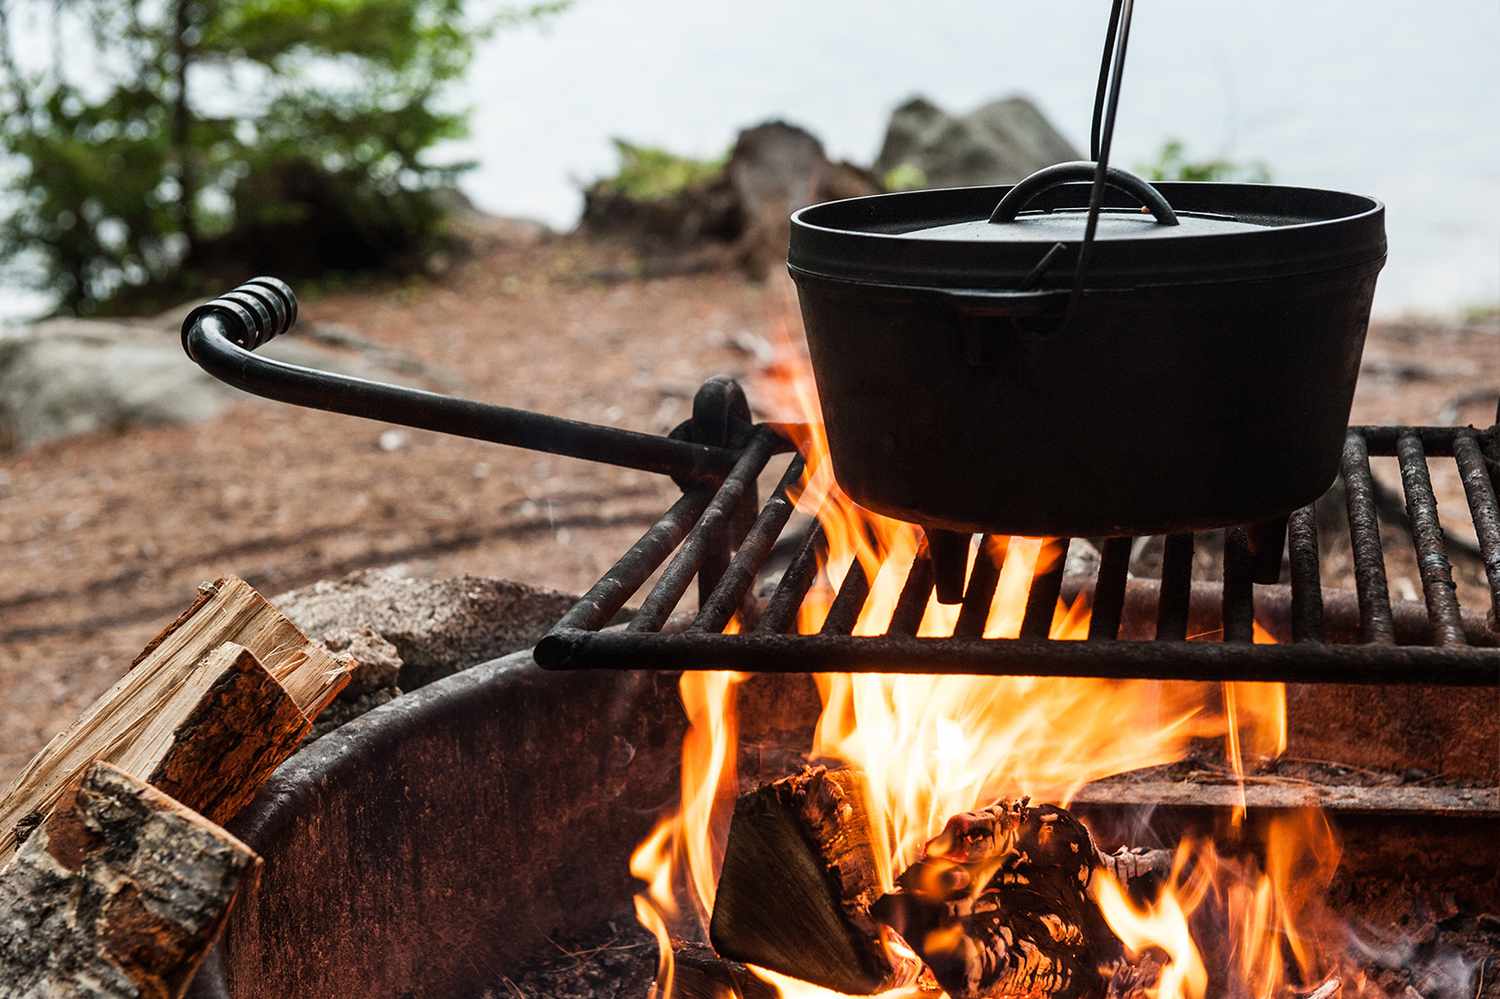 Campfire cooking kit: Essentials Equipment’s and Uses